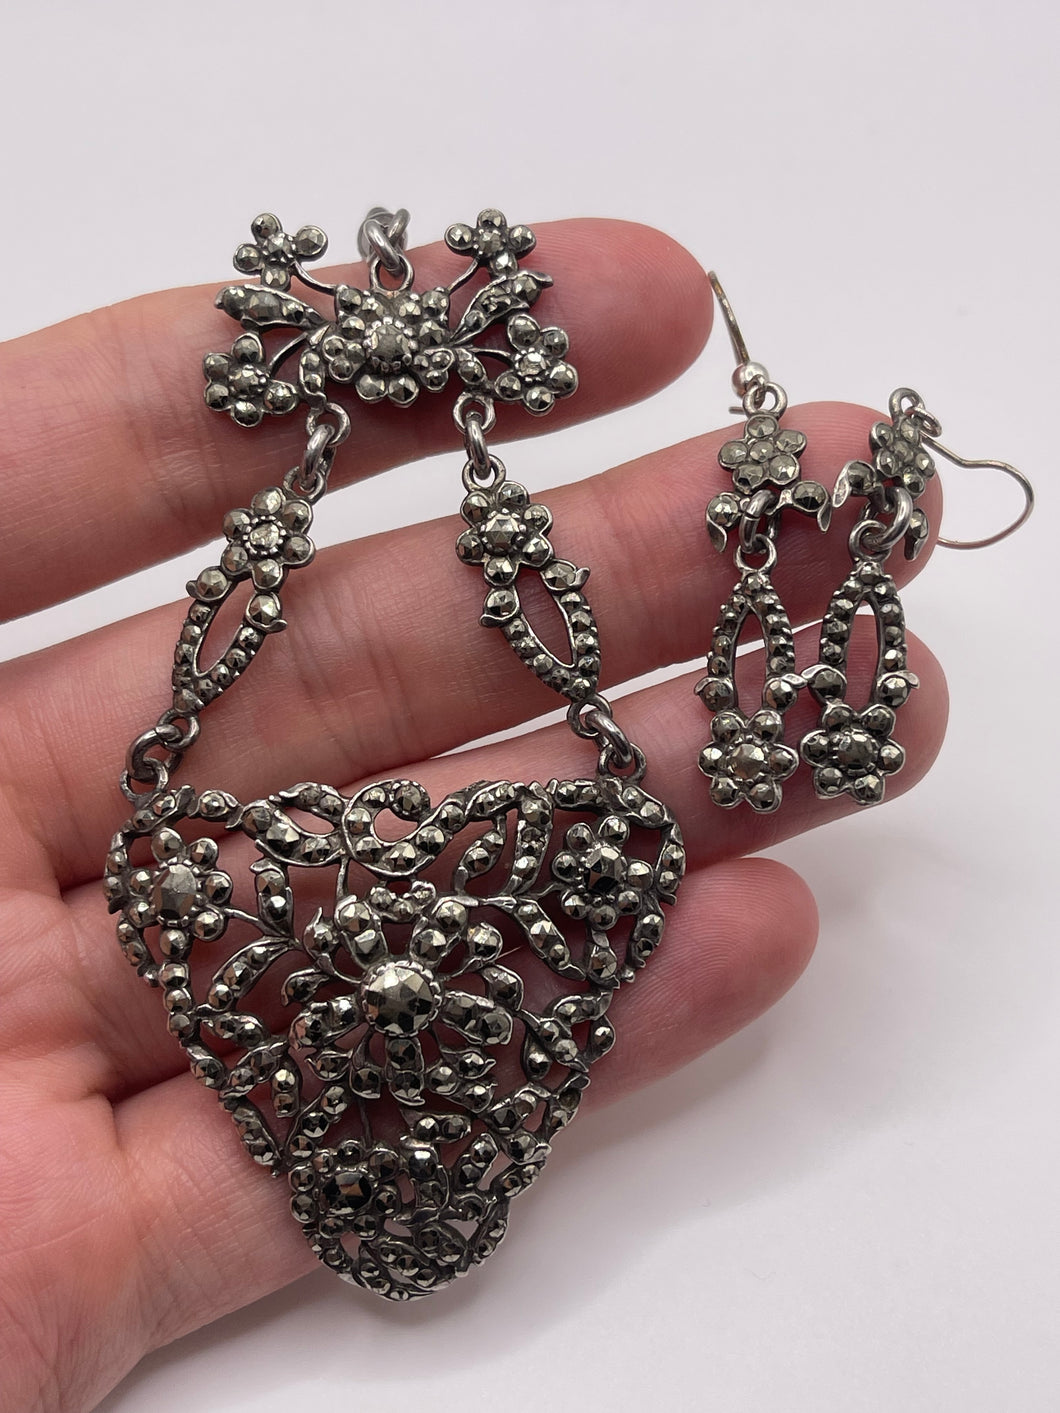 Antique silver pyrite pendant and earring set